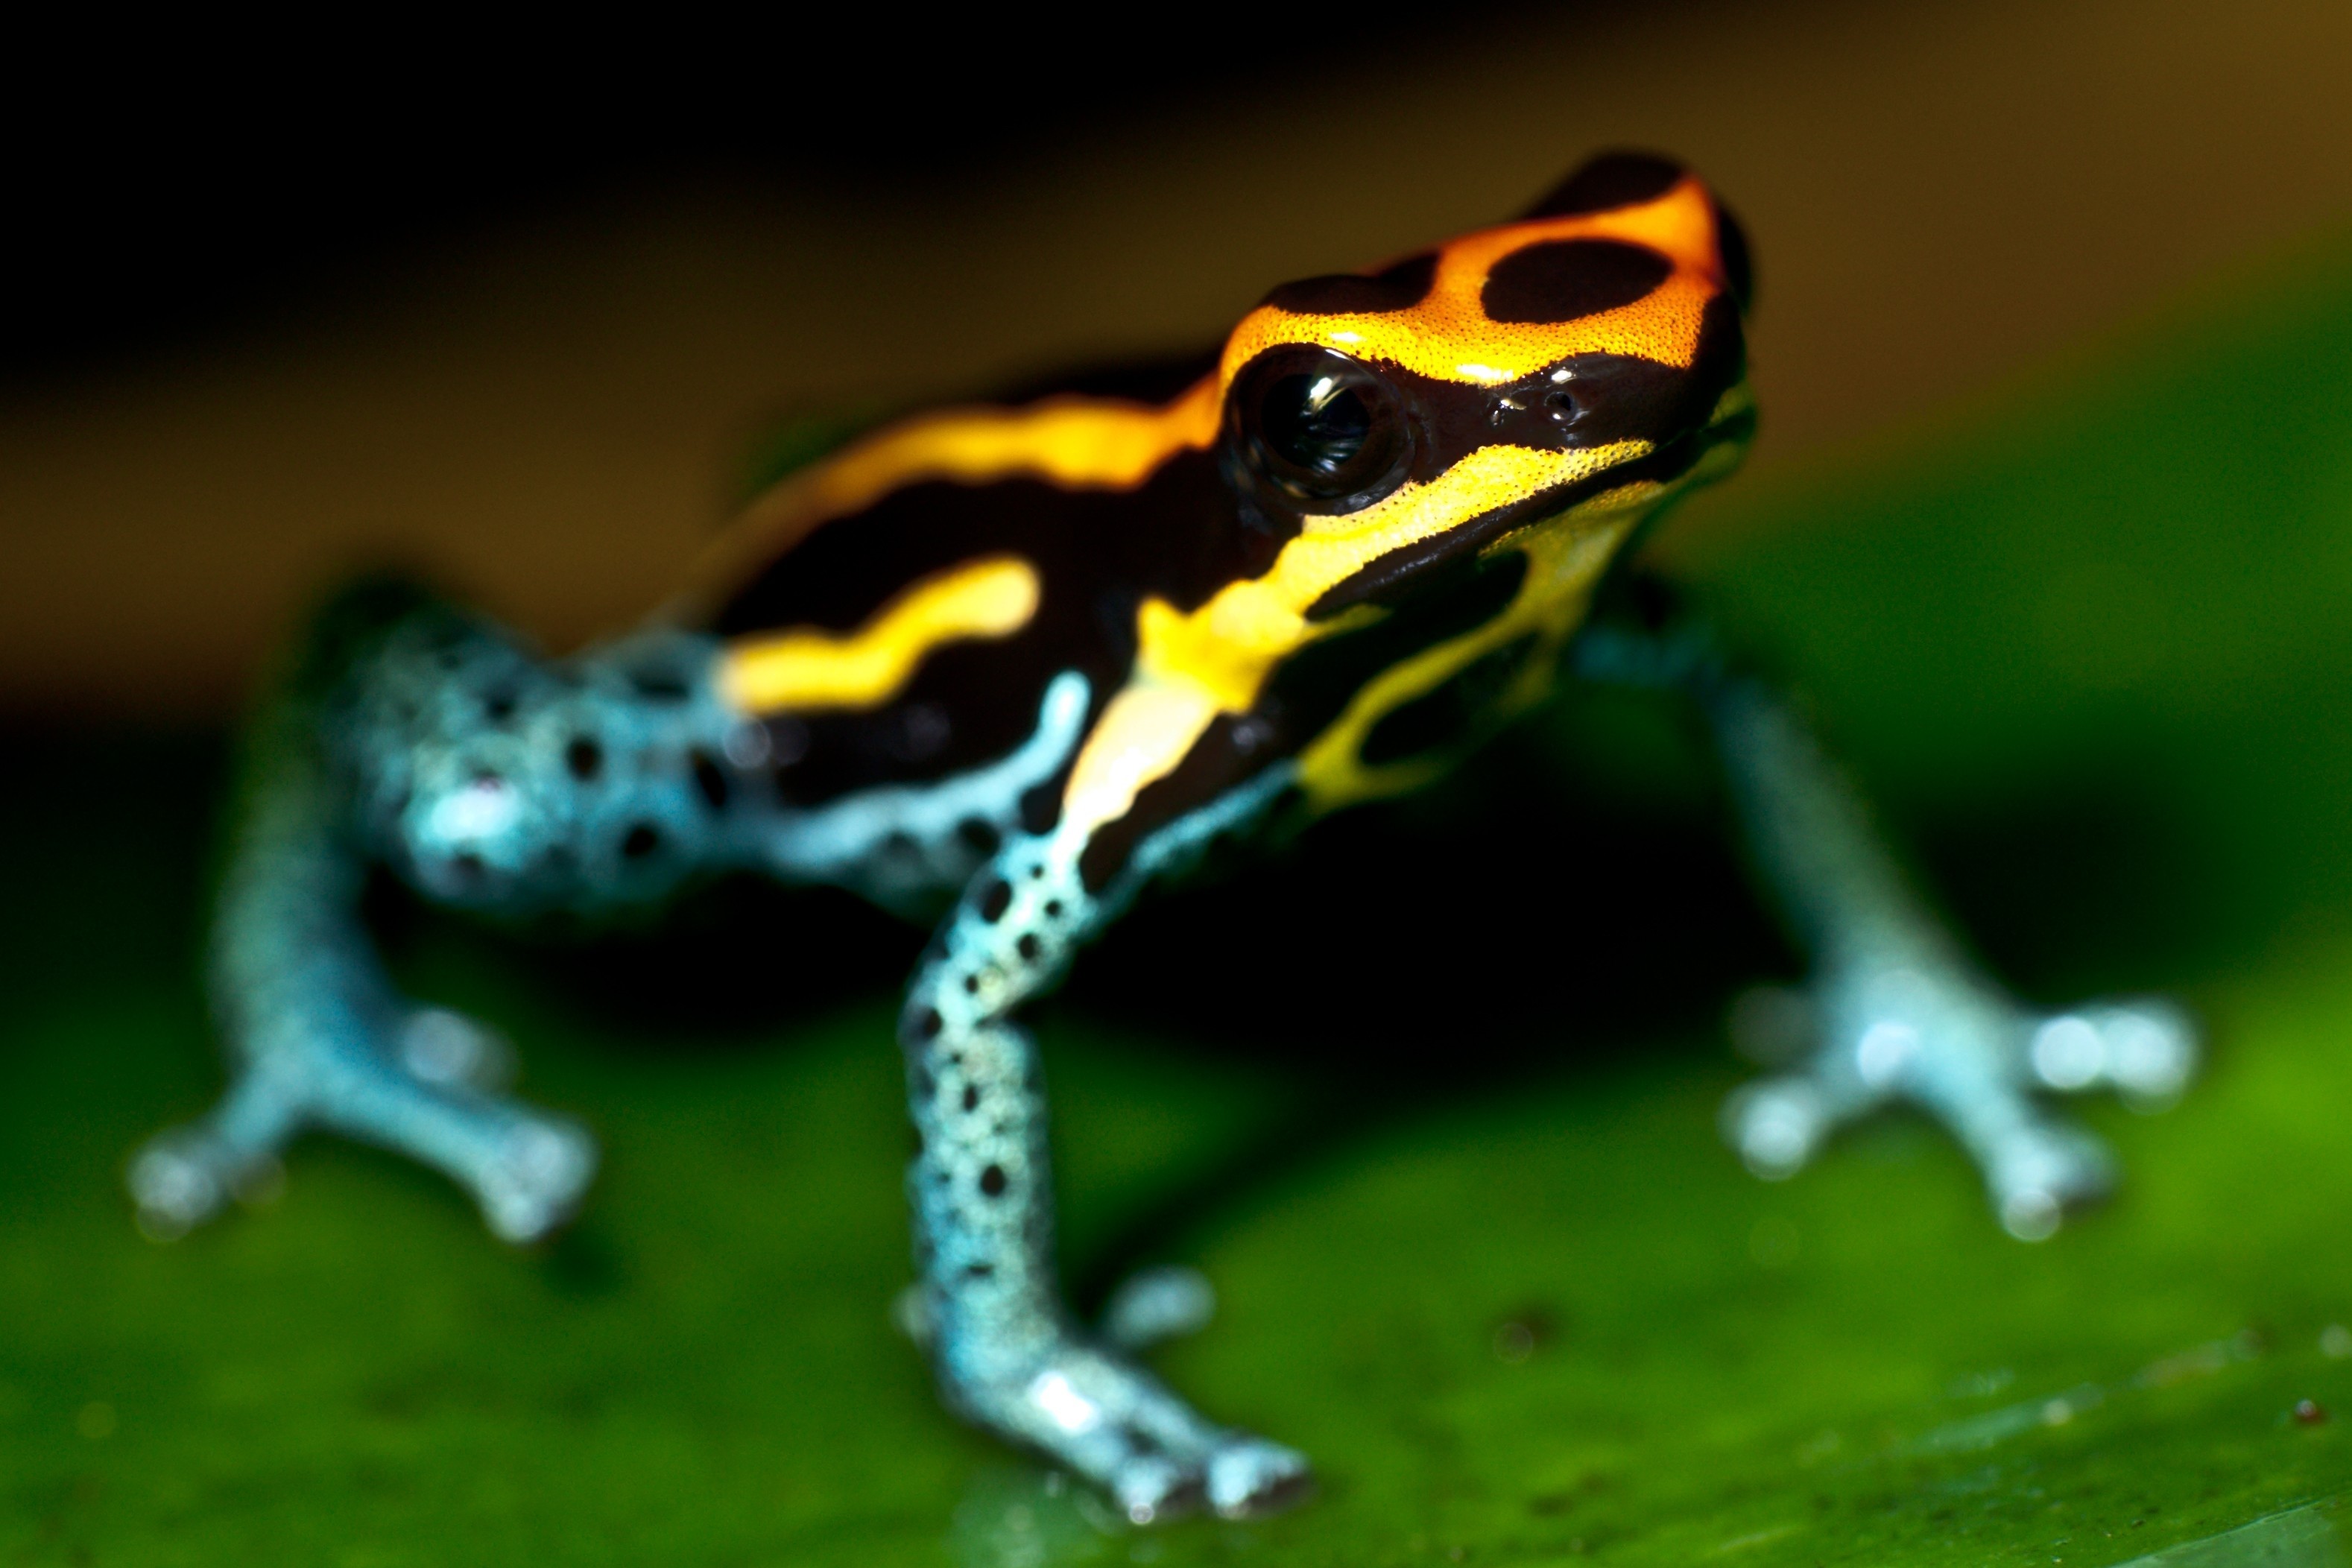 3156x2104 Explore More Wallpapers in the Poison dart frog Subcategory!